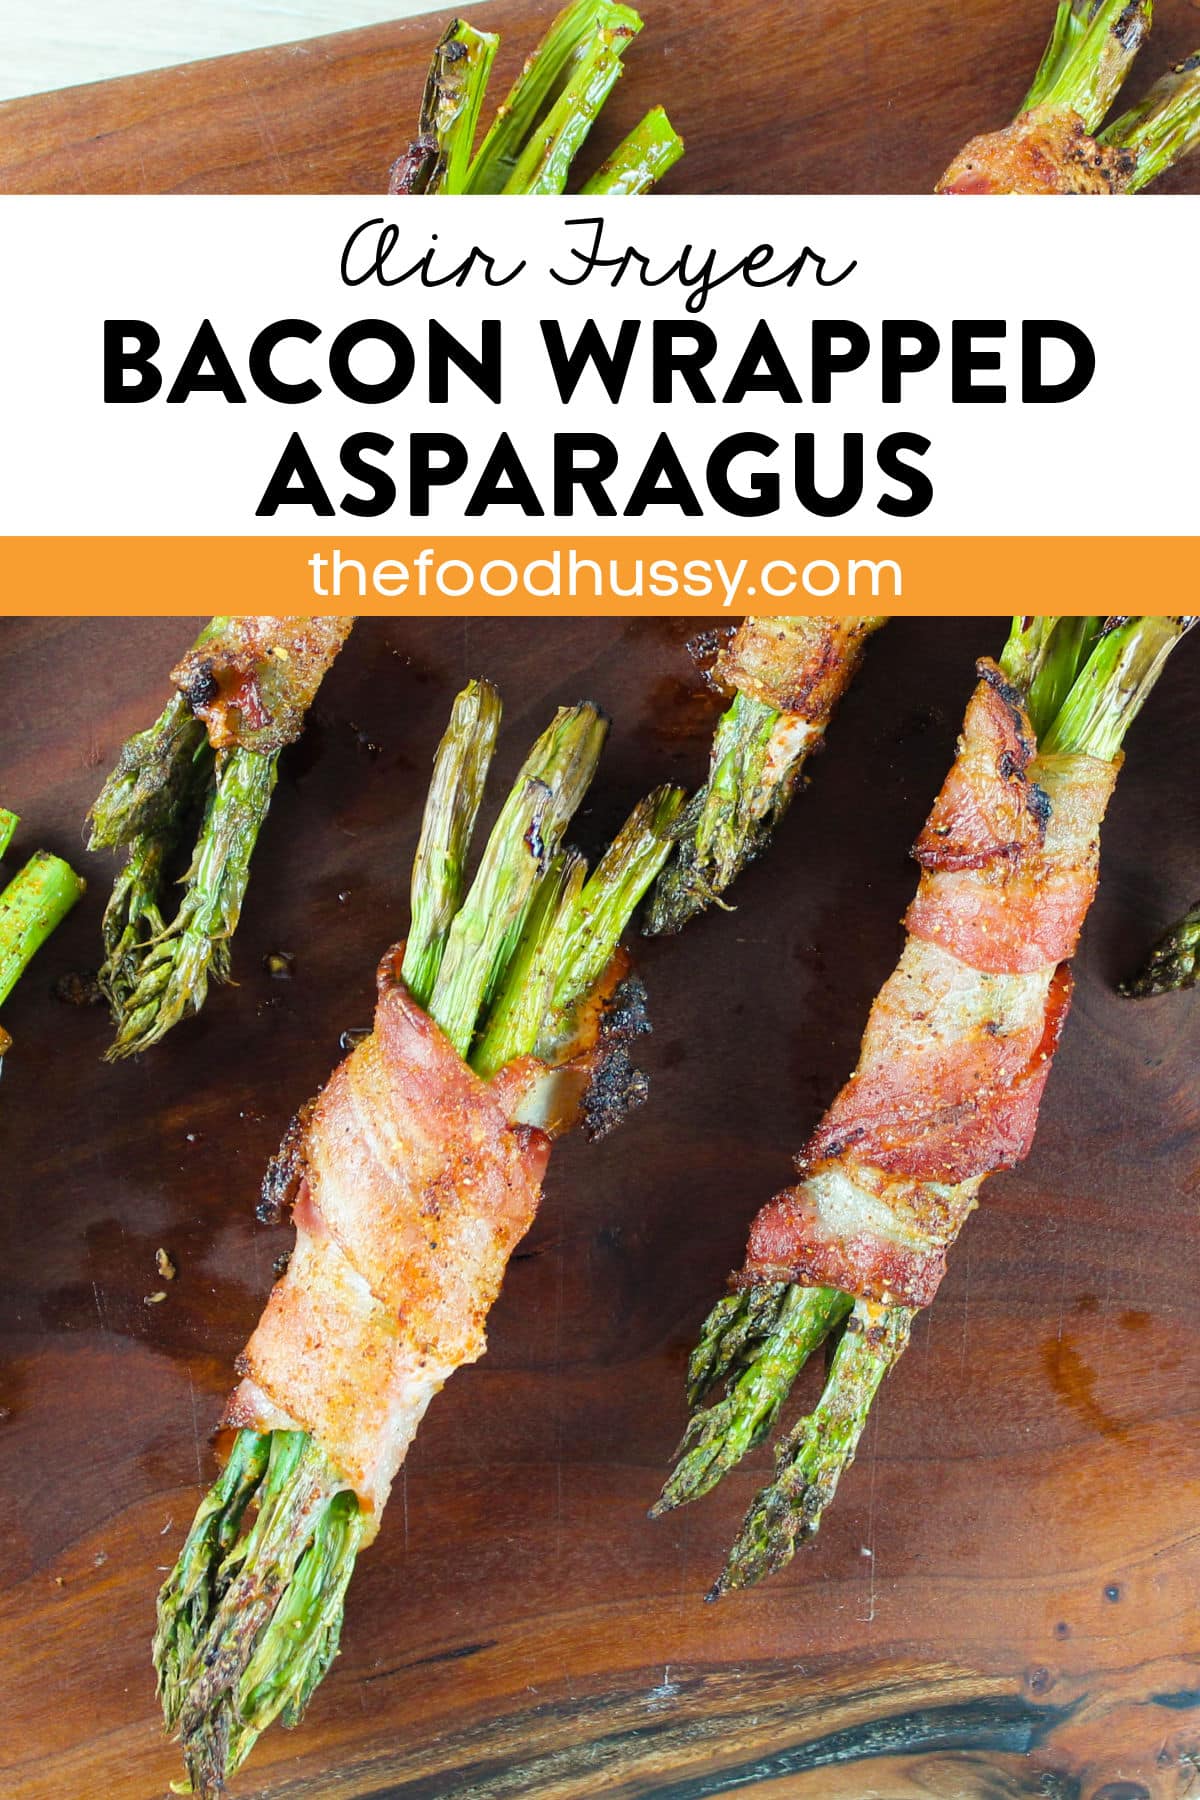 This Air Fryer Bacon Wrapped Asparagus recipe is delicious as a side dish with bundles of crunchy fresh asparagus wrapped in meaty bacon! via @foodhussy